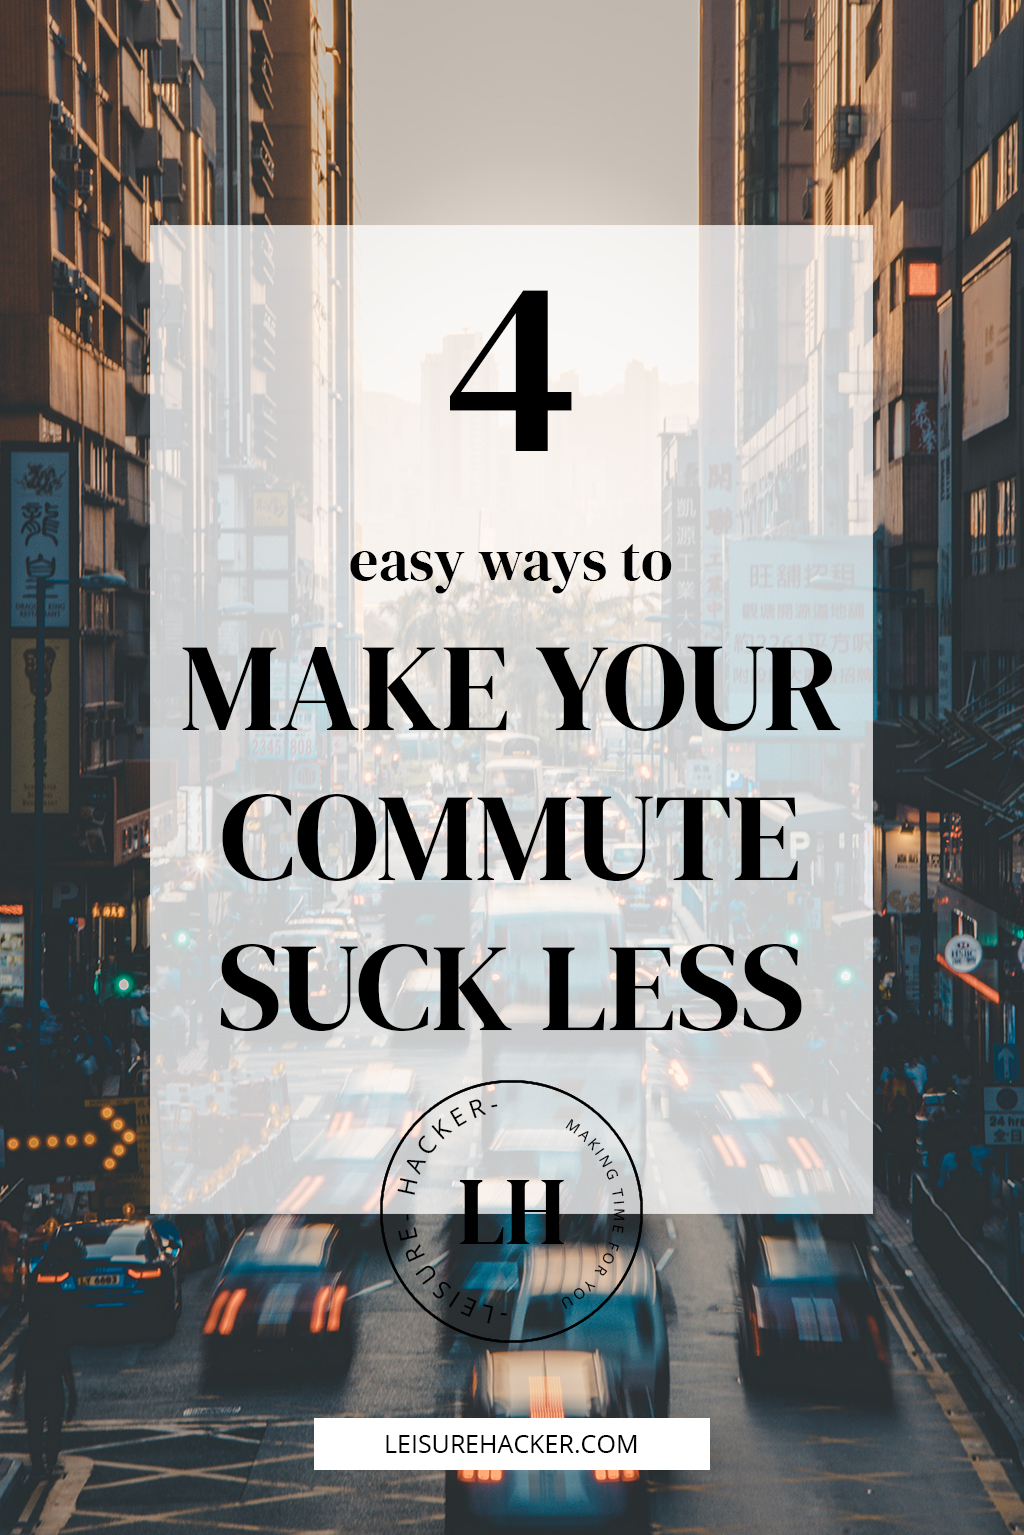 4 easy ways to make your commute suck less